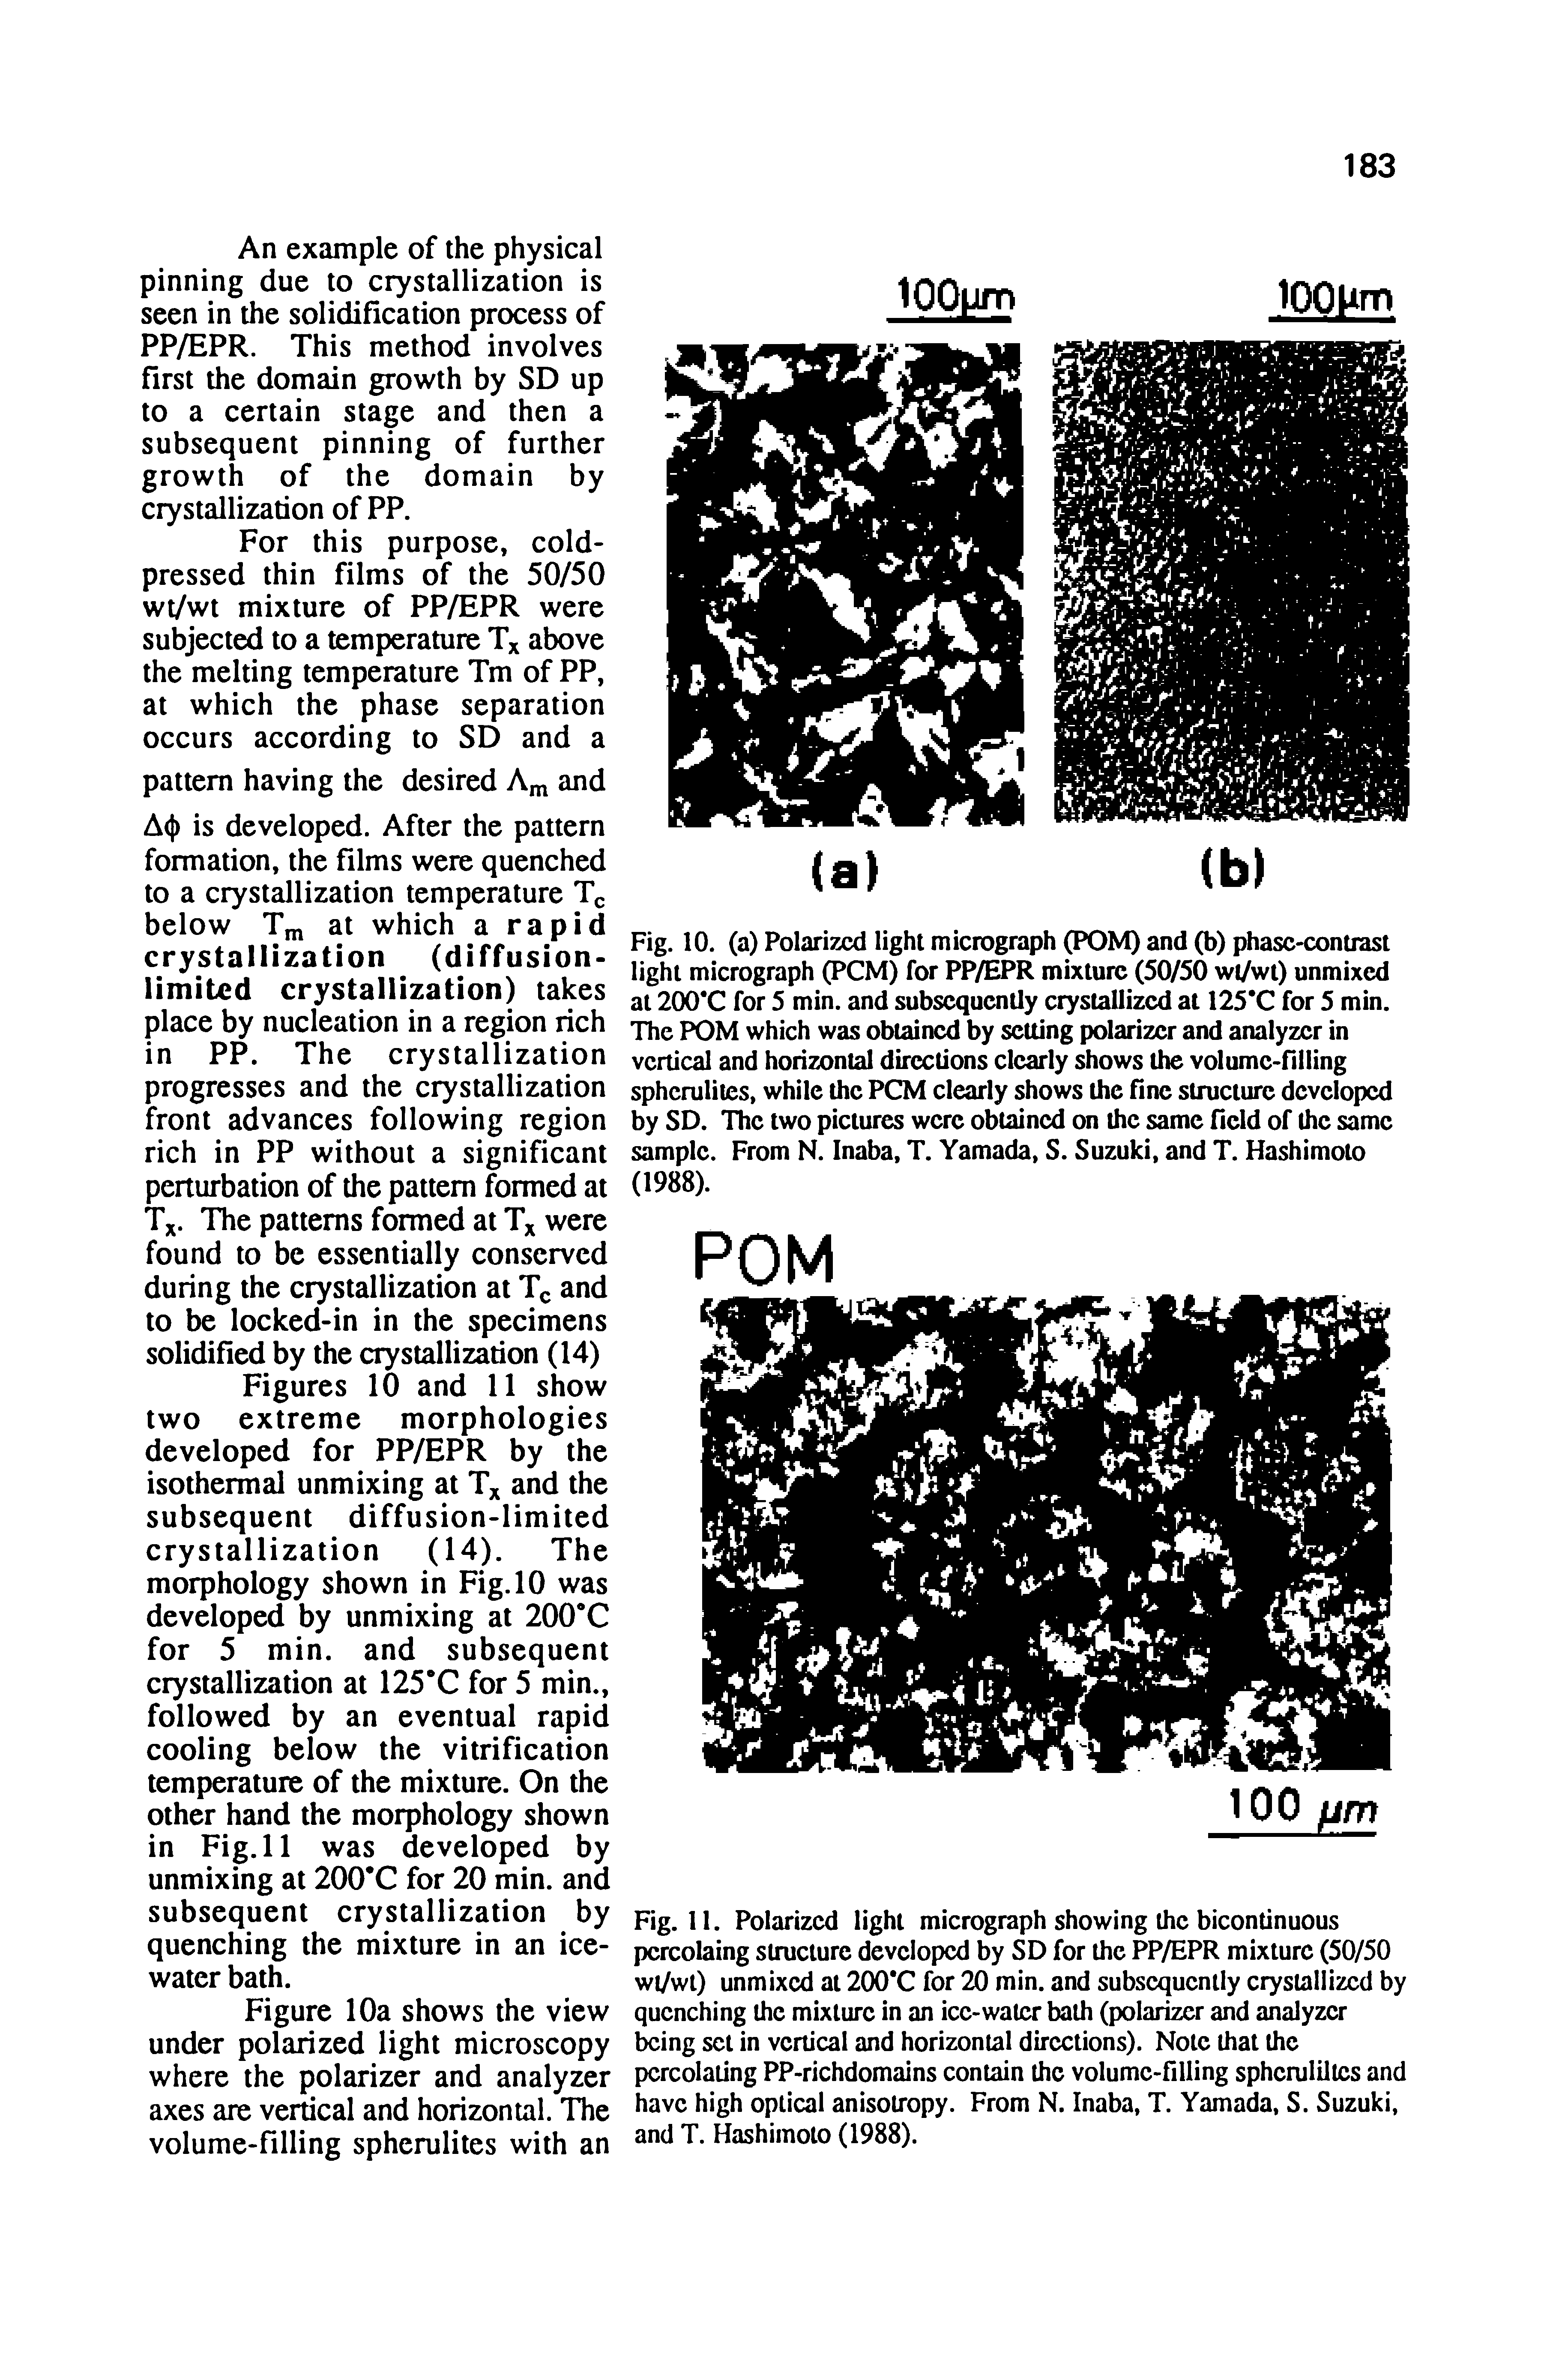 Figures 10 and 11 show two extreme morphologies developed for PP/EPR by the isothermal unmixing at Tx and the subsequent diffusion-limited crystallization (14). The morphology shown in Fig. 10 was developed by unmixing at 200 C for 5 min. and subsequent crystallization at 125 C for 5 min., followed by an eventual rapid cooling below the vitrification temperature of the mixture. On the other hand the morphology shown in Fig. 11 was developed by unmixing at 200 C for 20 min. and subsequent crystallization by quenching the mixture in an ice-water bath.